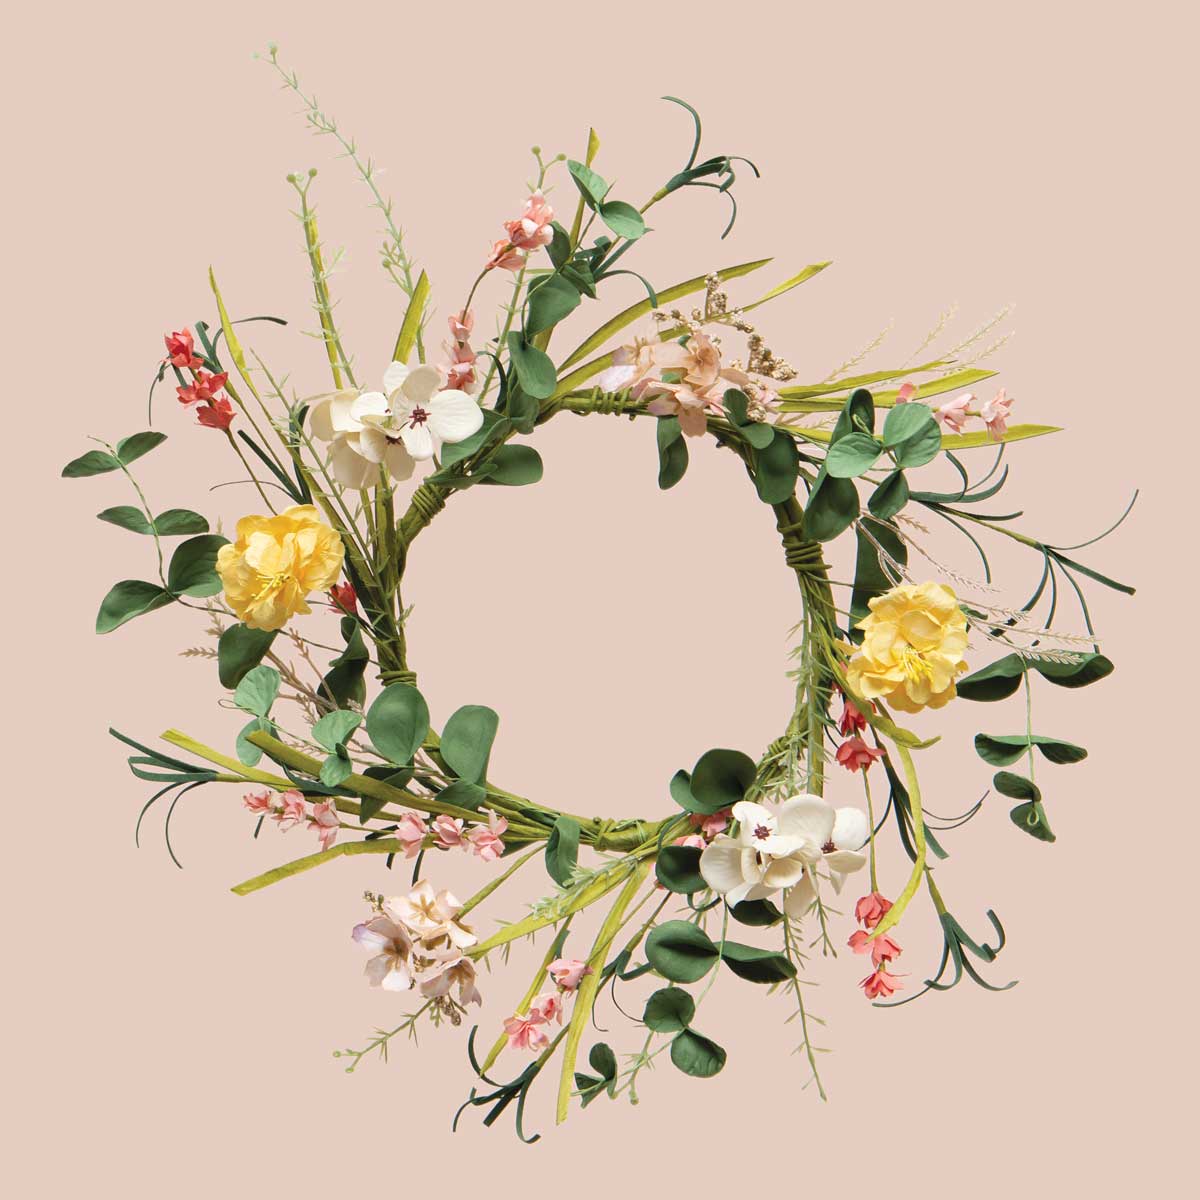 b50 MINI WREATH WHIMSEY FLORAL 17IN (INNER RING 6.5IN)